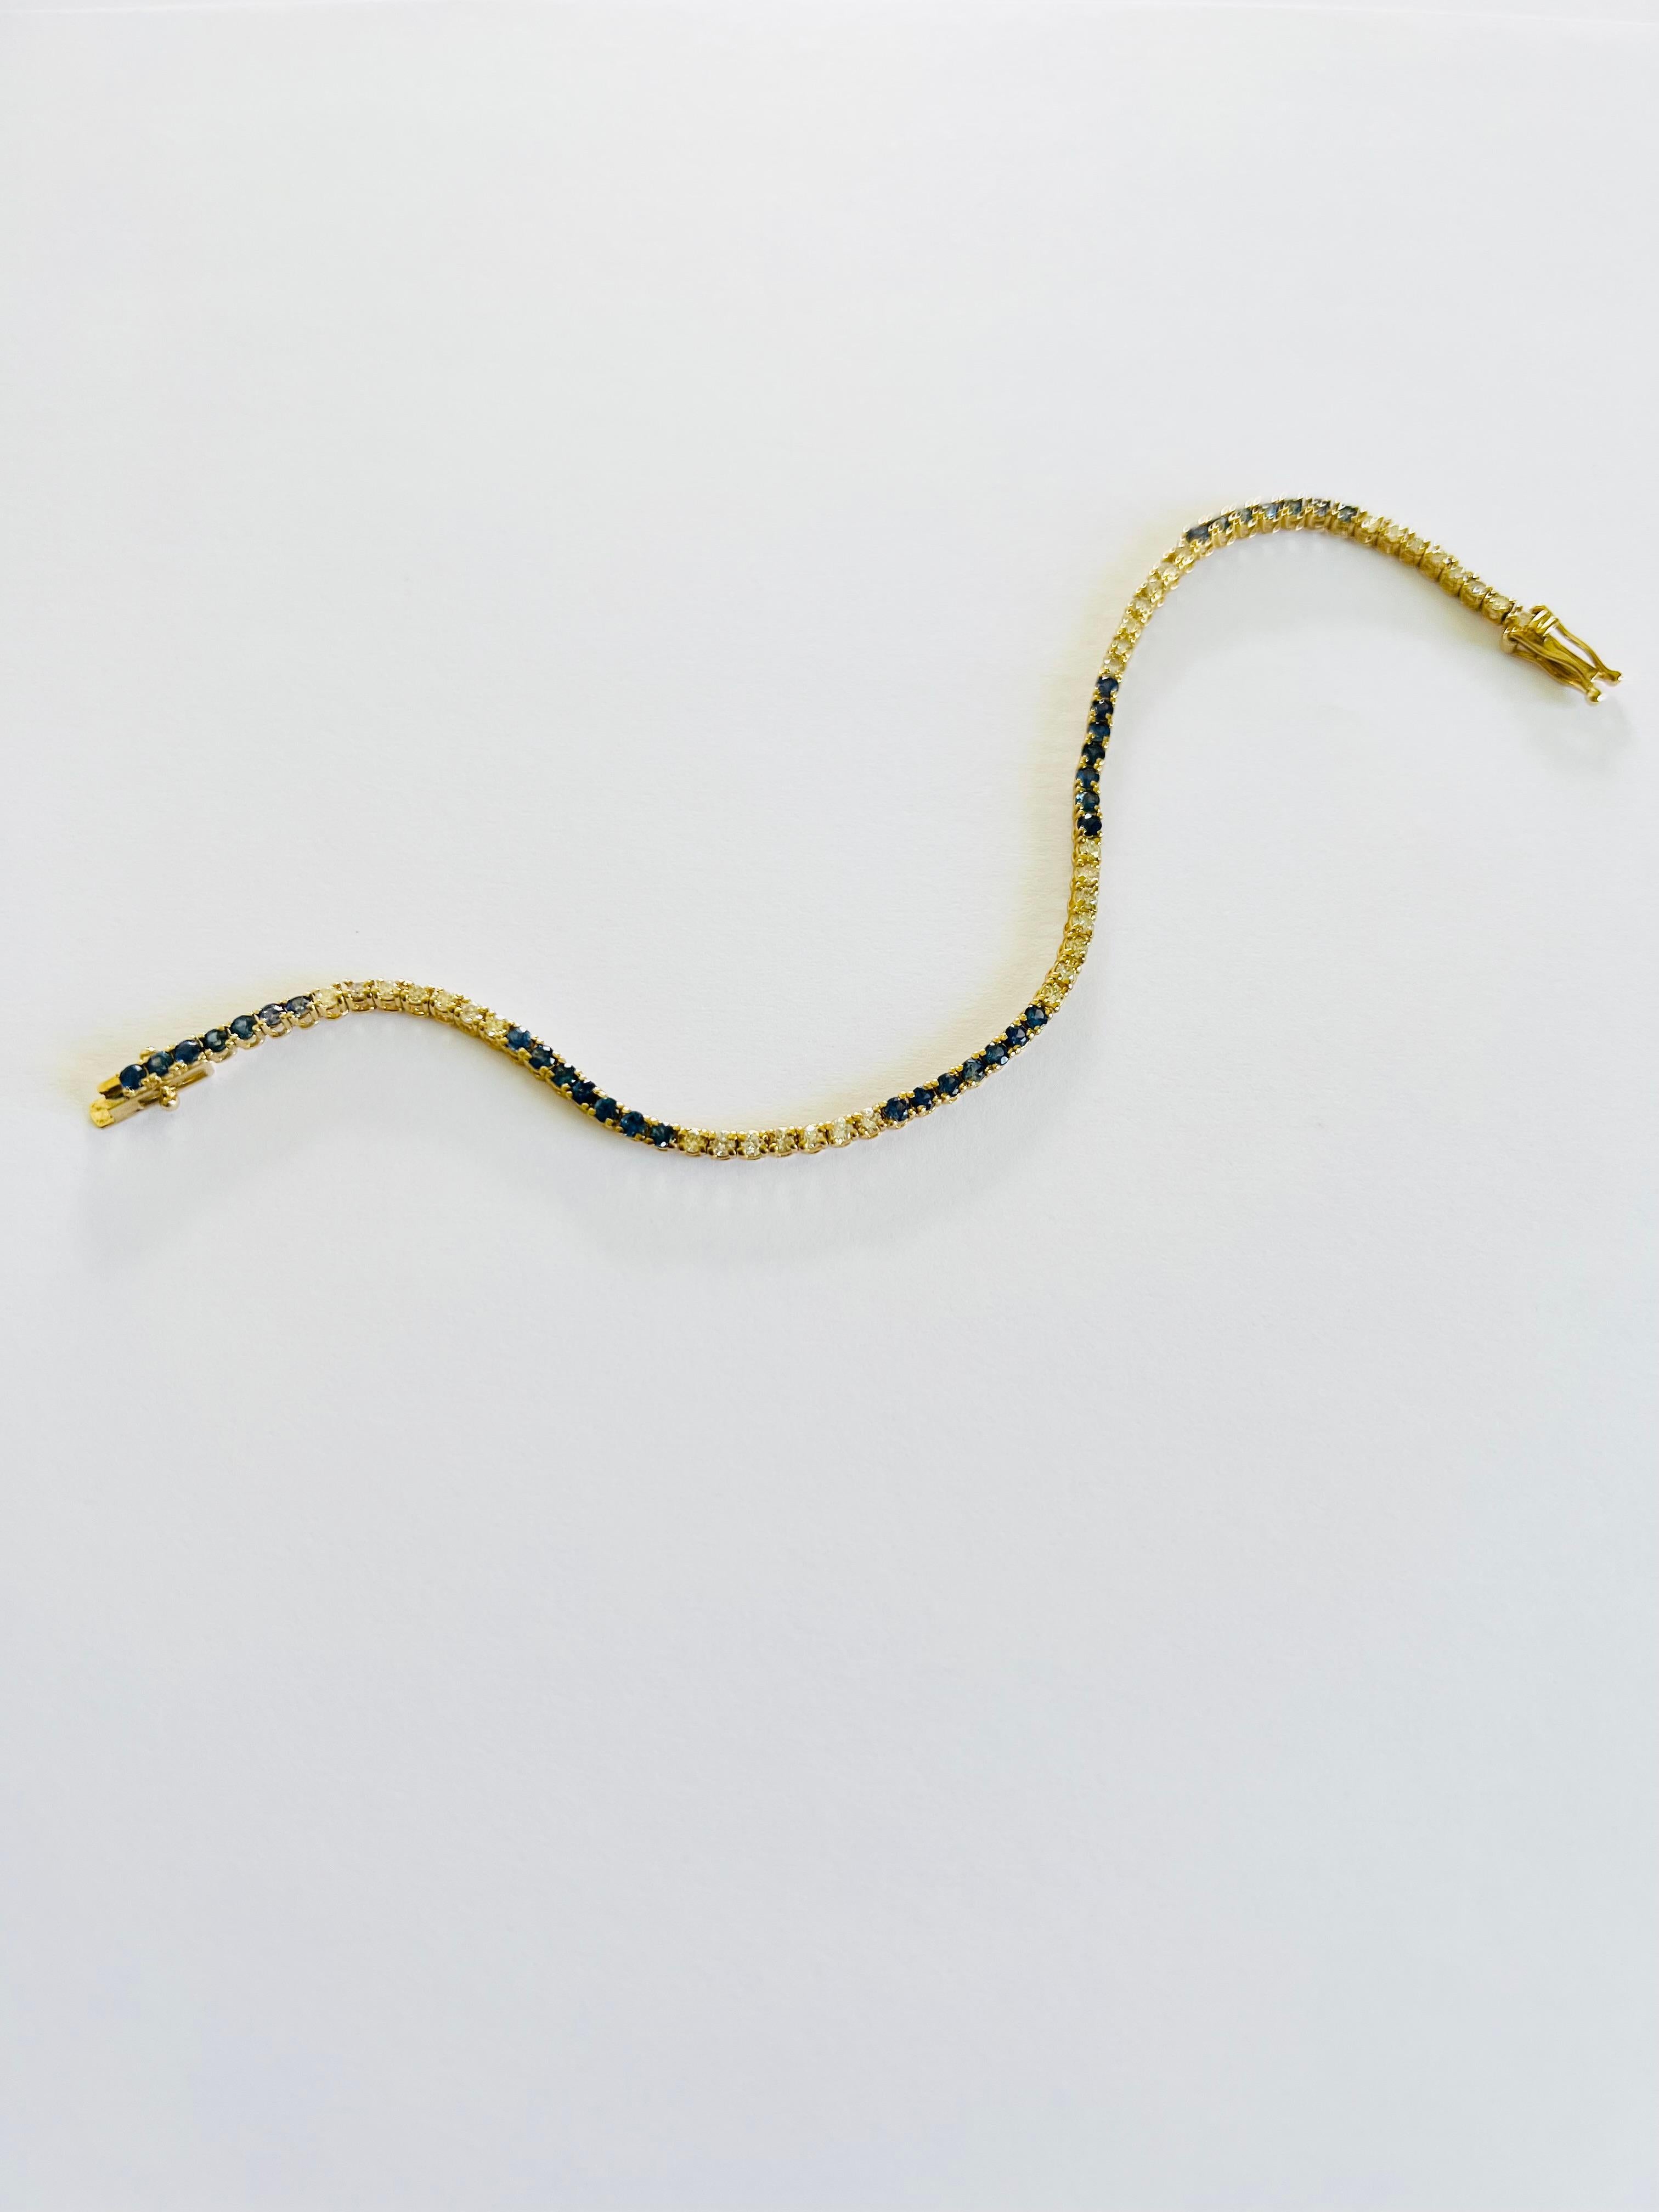 2.89 Carat Natural Blue Sapphire Diamond 14 Karat Yellow Gold Bracelet In New Condition For Sale In Los Angeles, CA